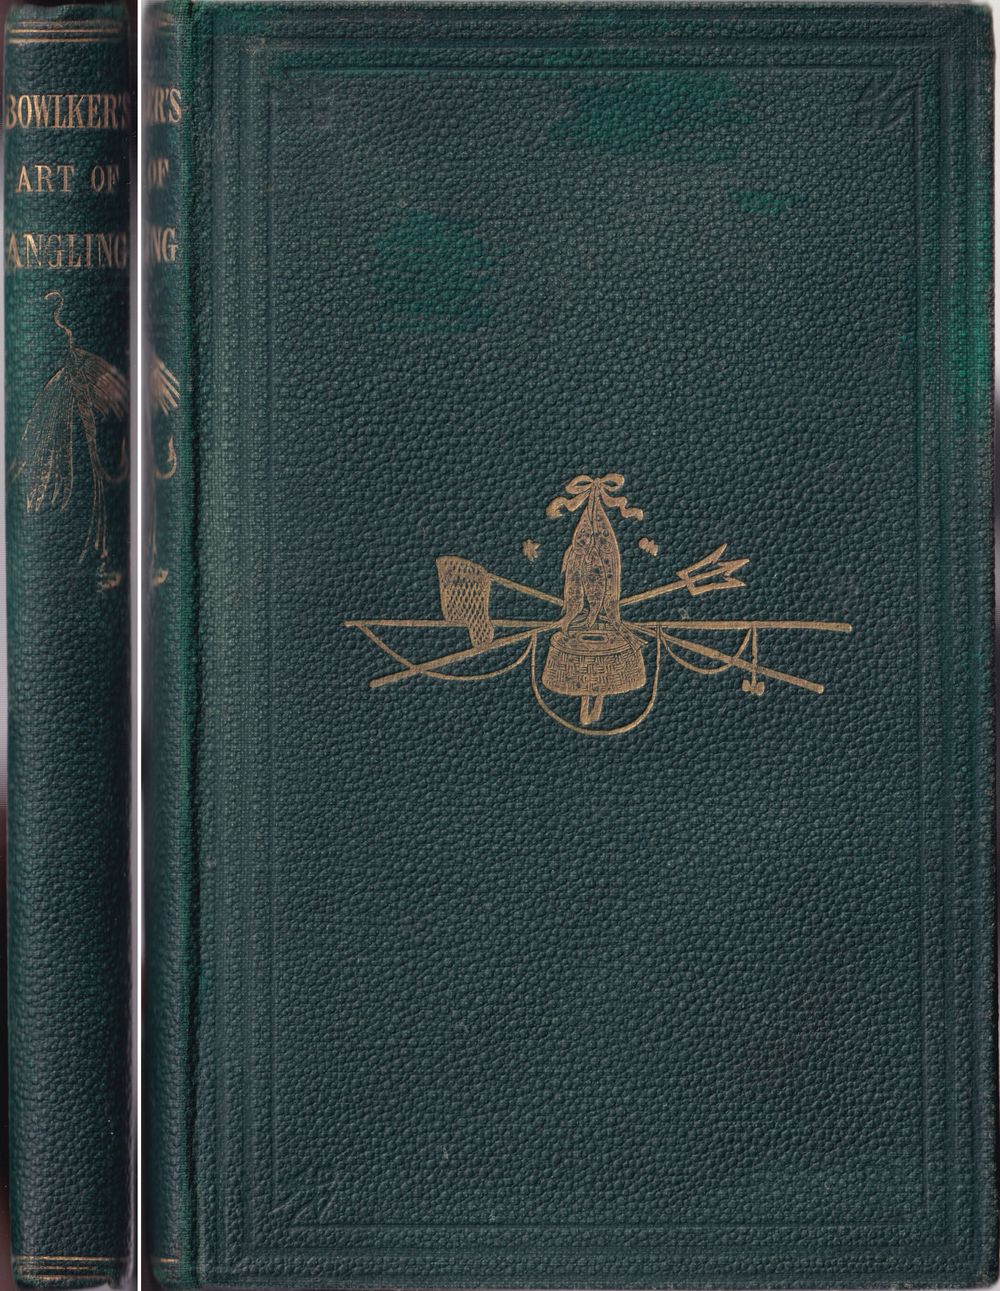 BOWLKER'S ART OF ANGLING: Containing directions for fly-fishing, trolling,  bottom fishing, making artificial flies, &c. With a list of the most  celebrated fishing stations in North Wales. A new edition, revised. by